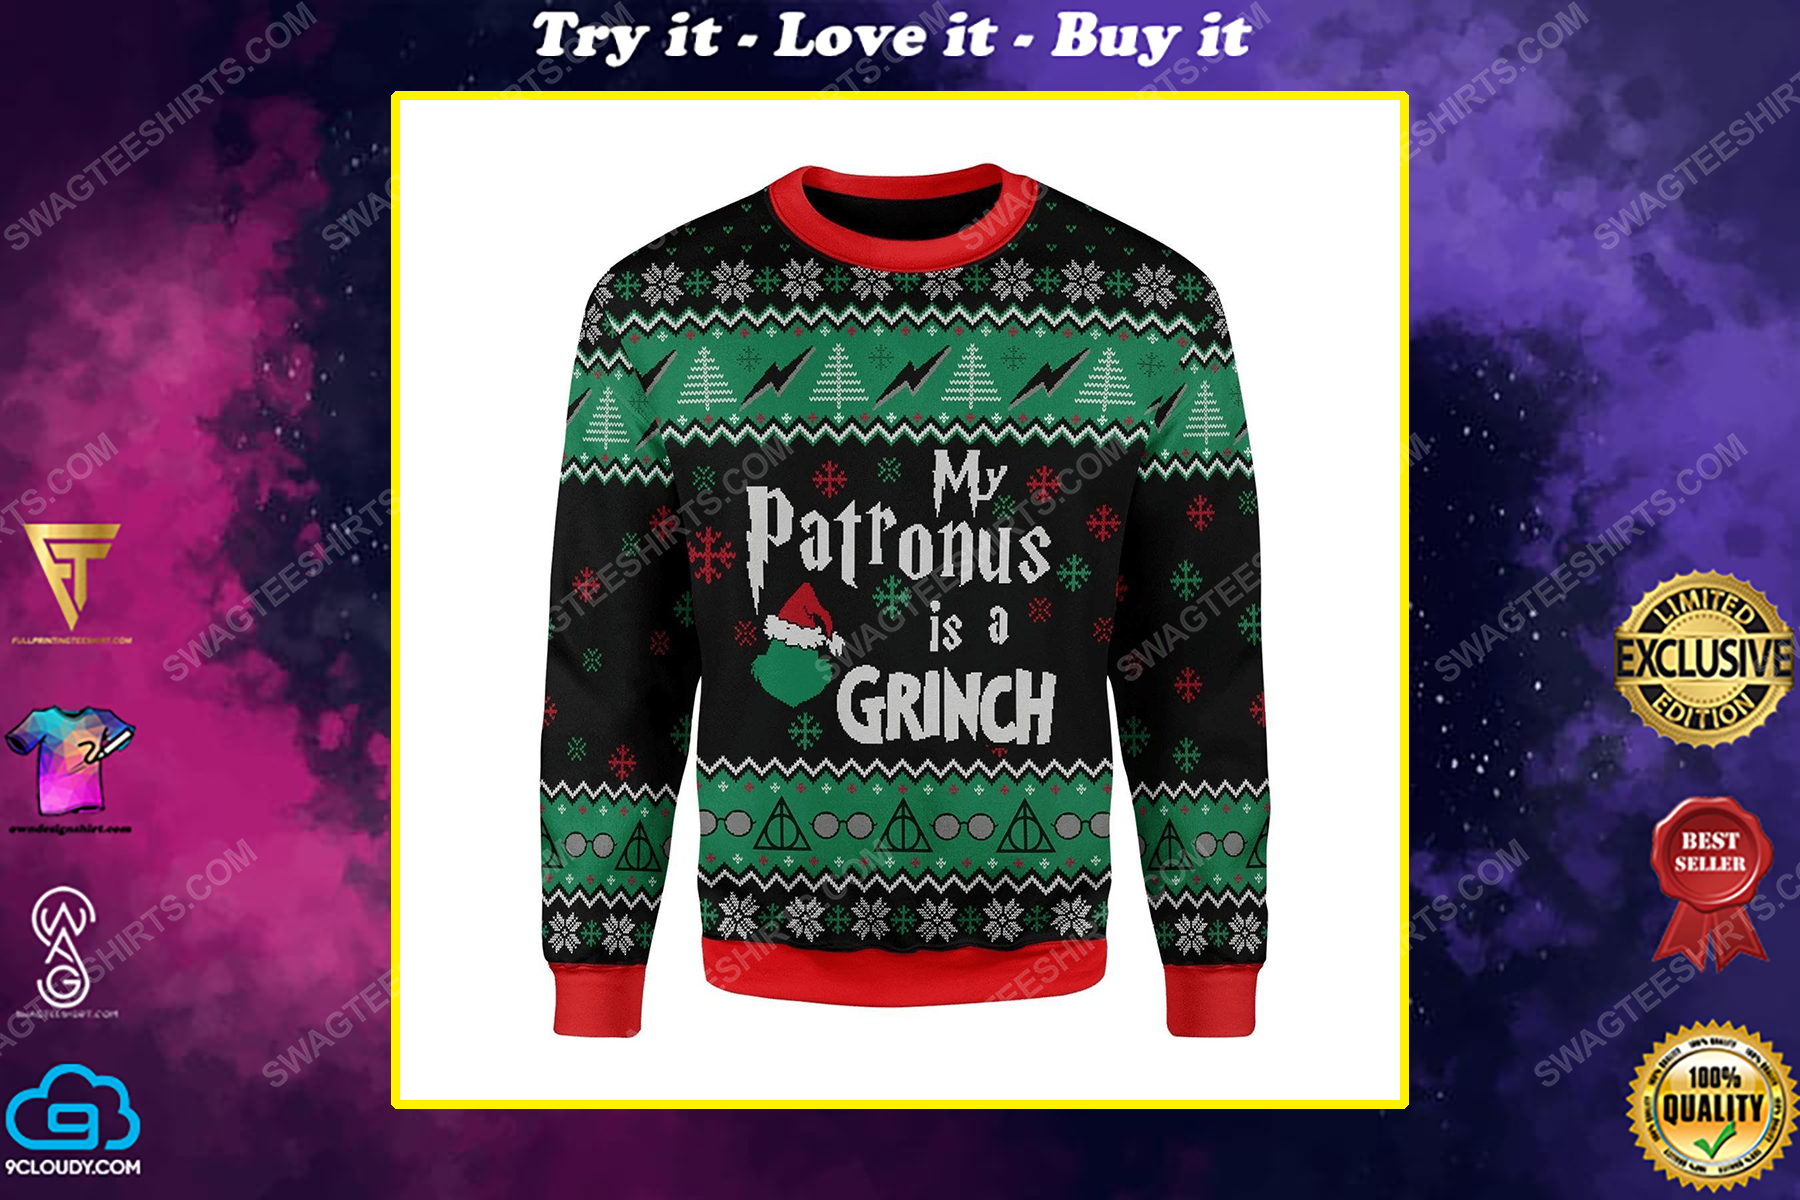 My patronus is the grinch ugly christmas sweater 1